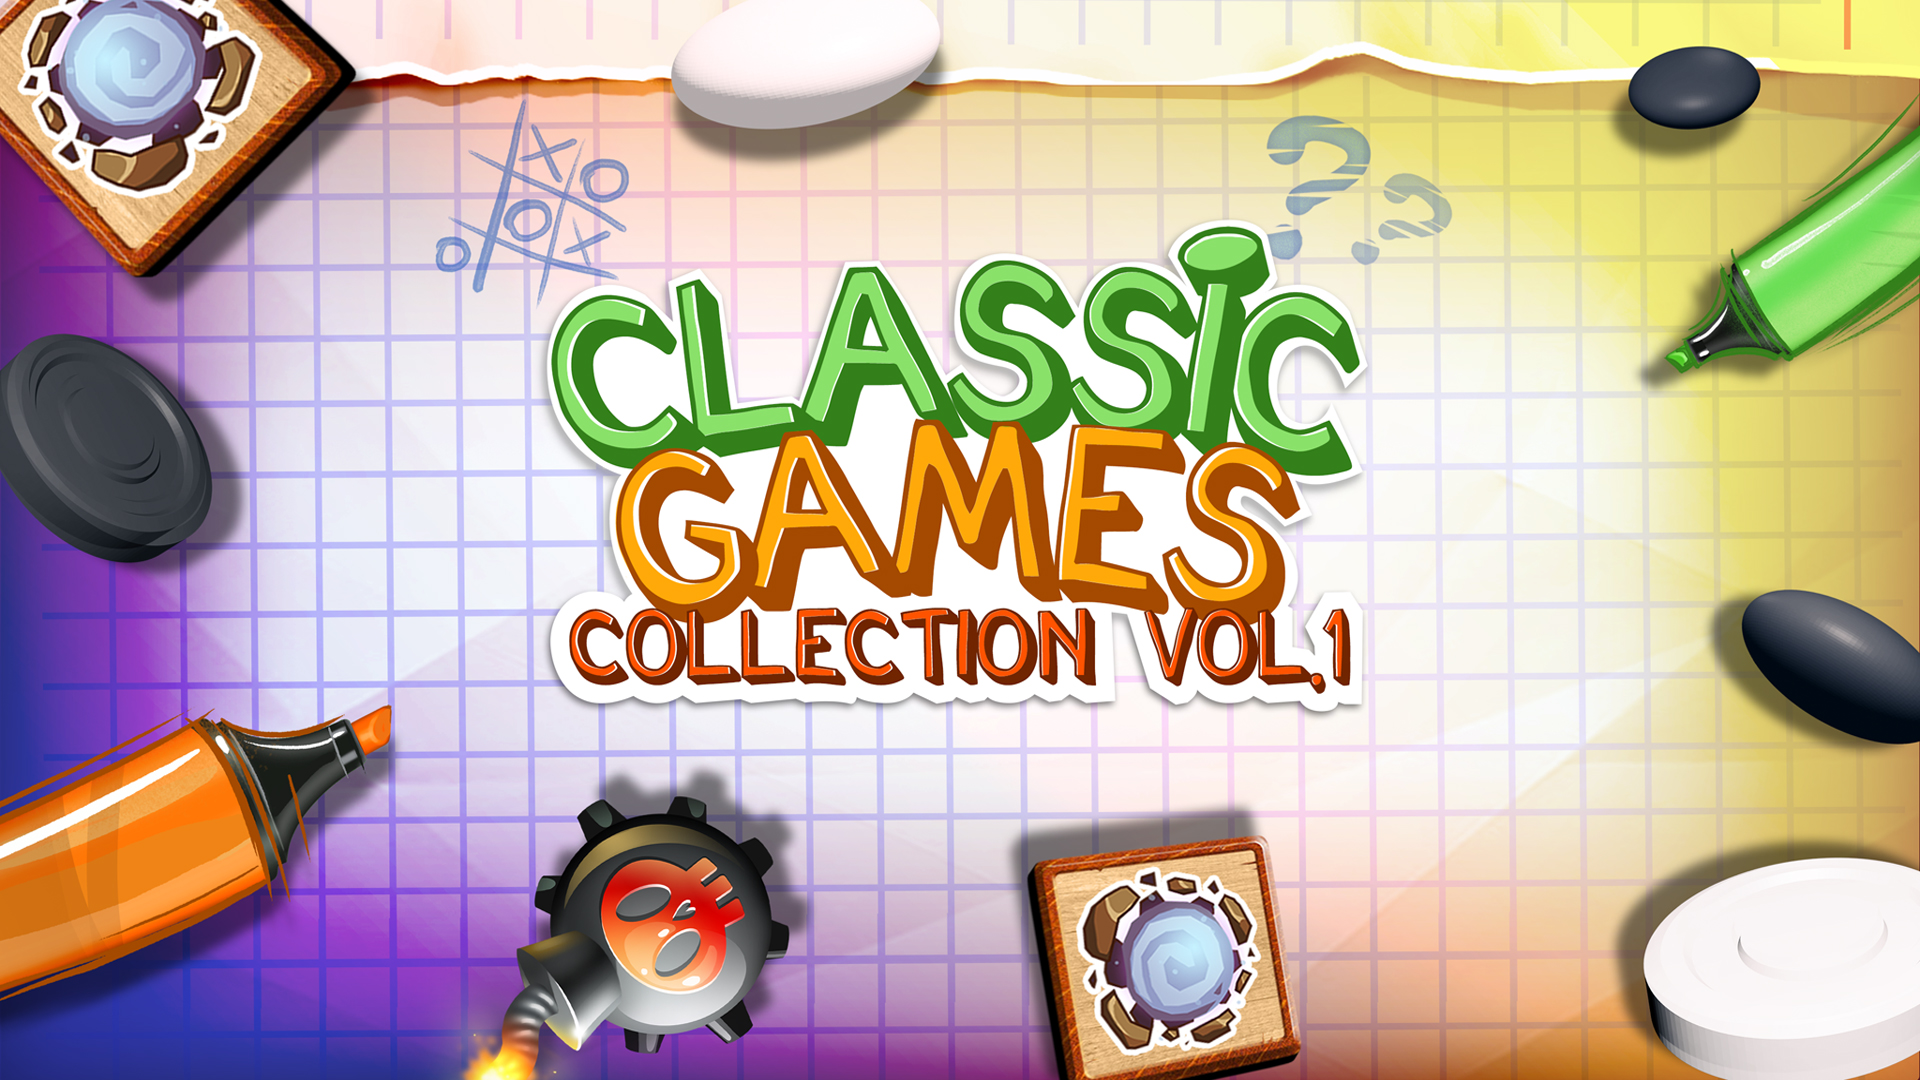 Classic games collection Vol.1. Classic games collection Nintendo Switch. First class game. Classic games collection